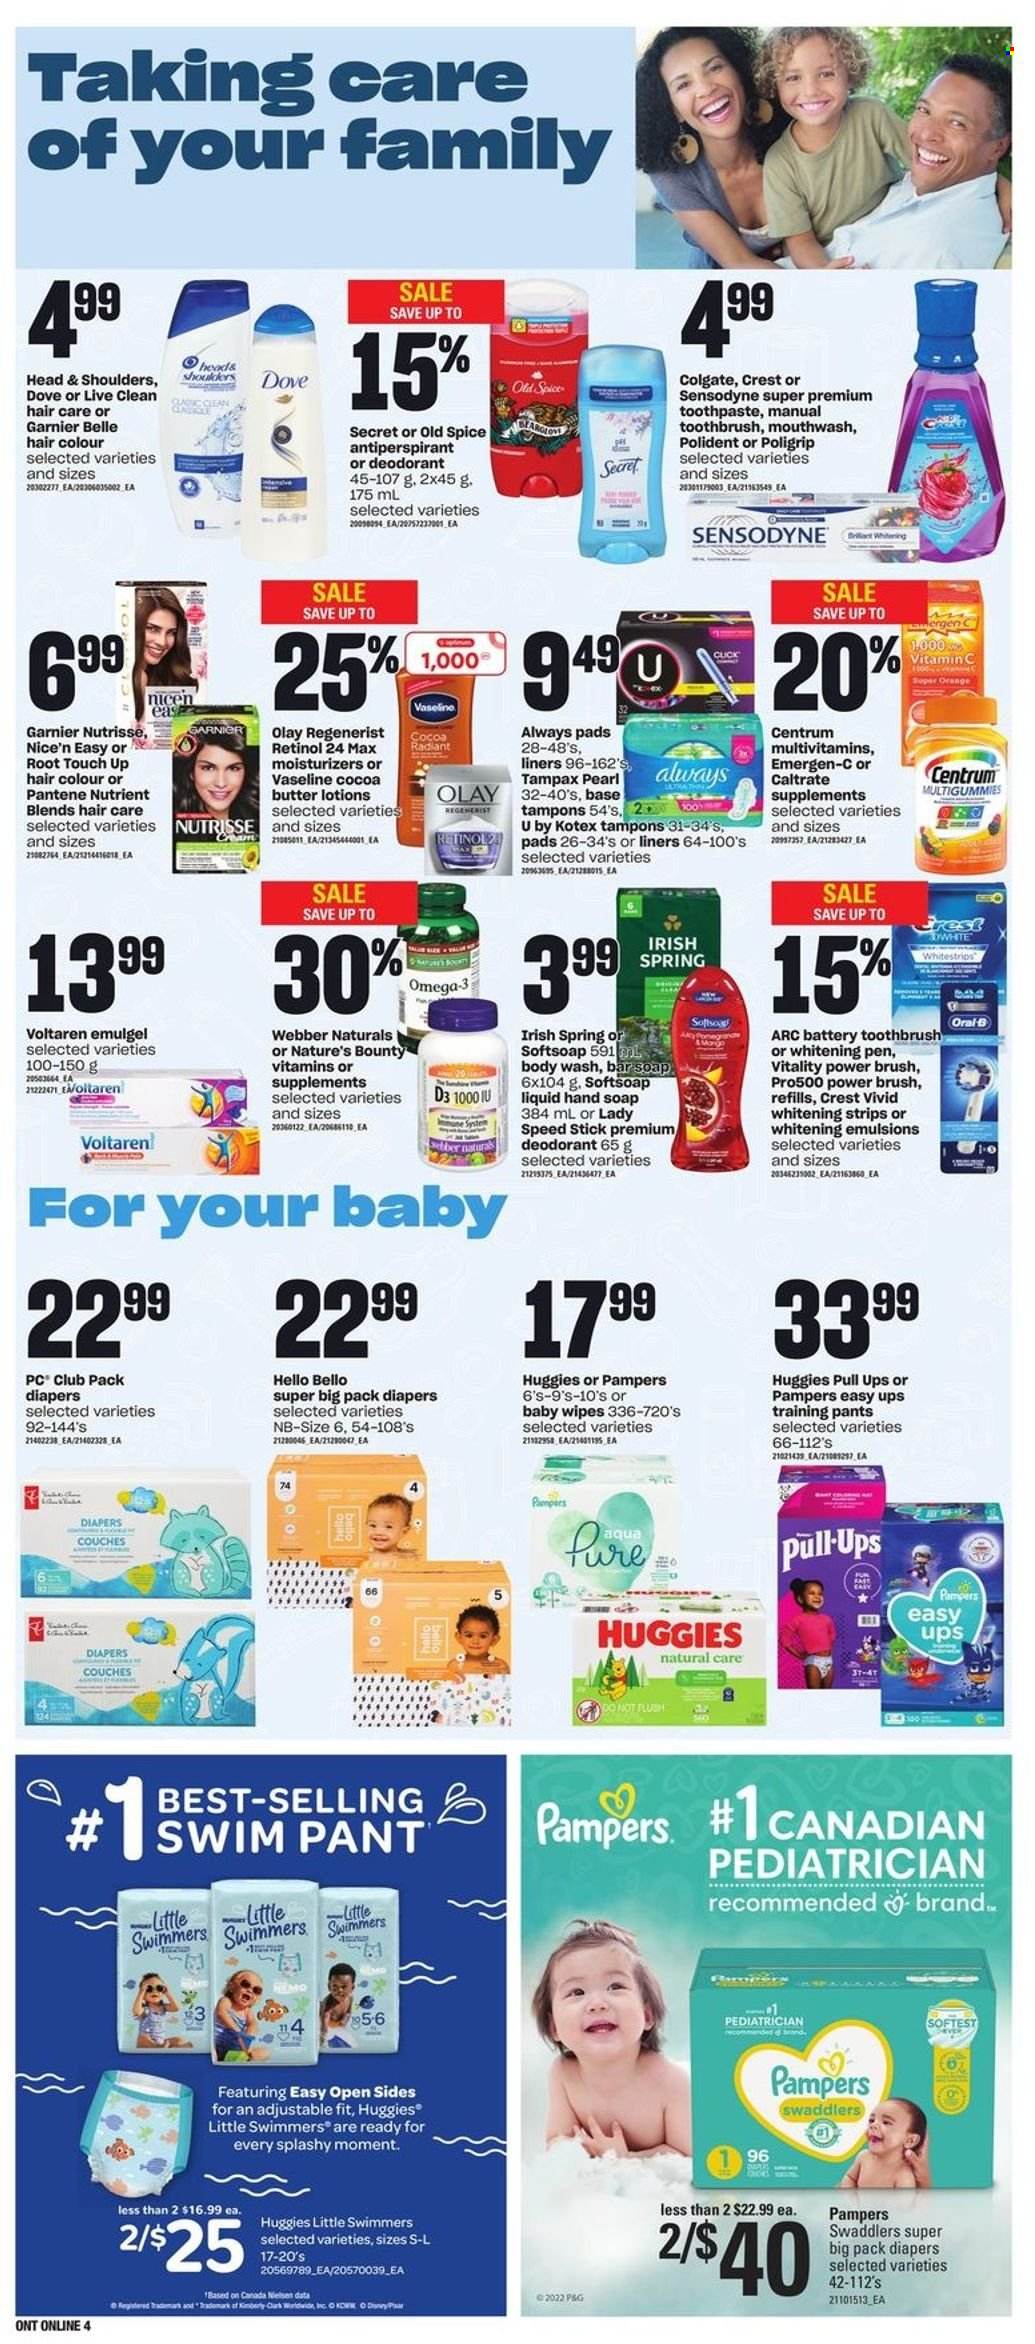 thumbnail - Loblaws Flyer - June 30, 2022 - July 06, 2022 - Sales products - pomegranate, strips, spice, wipes, pants, baby wipes, nappies, baby pants, body wash, Softsoap, hand soap, Vaseline, soap bar, soap, toothbrush, toothpaste, mouthwash, Polident, Crest, Always pads, Kotex, tampons, moisturizer, Olay, hair color, anti-perspirant, Speed Stick, multivitamin, Nature's Bounty, vitamin c, Omega-3, vitamin D3, Centrum, Dove, Colgate, Garnier, Tampax, Head & Shoulders, Huggies, Pampers, Pantene, Old Spice, Oral-B, Sensodyne, oranges, deodorant. Page 9.